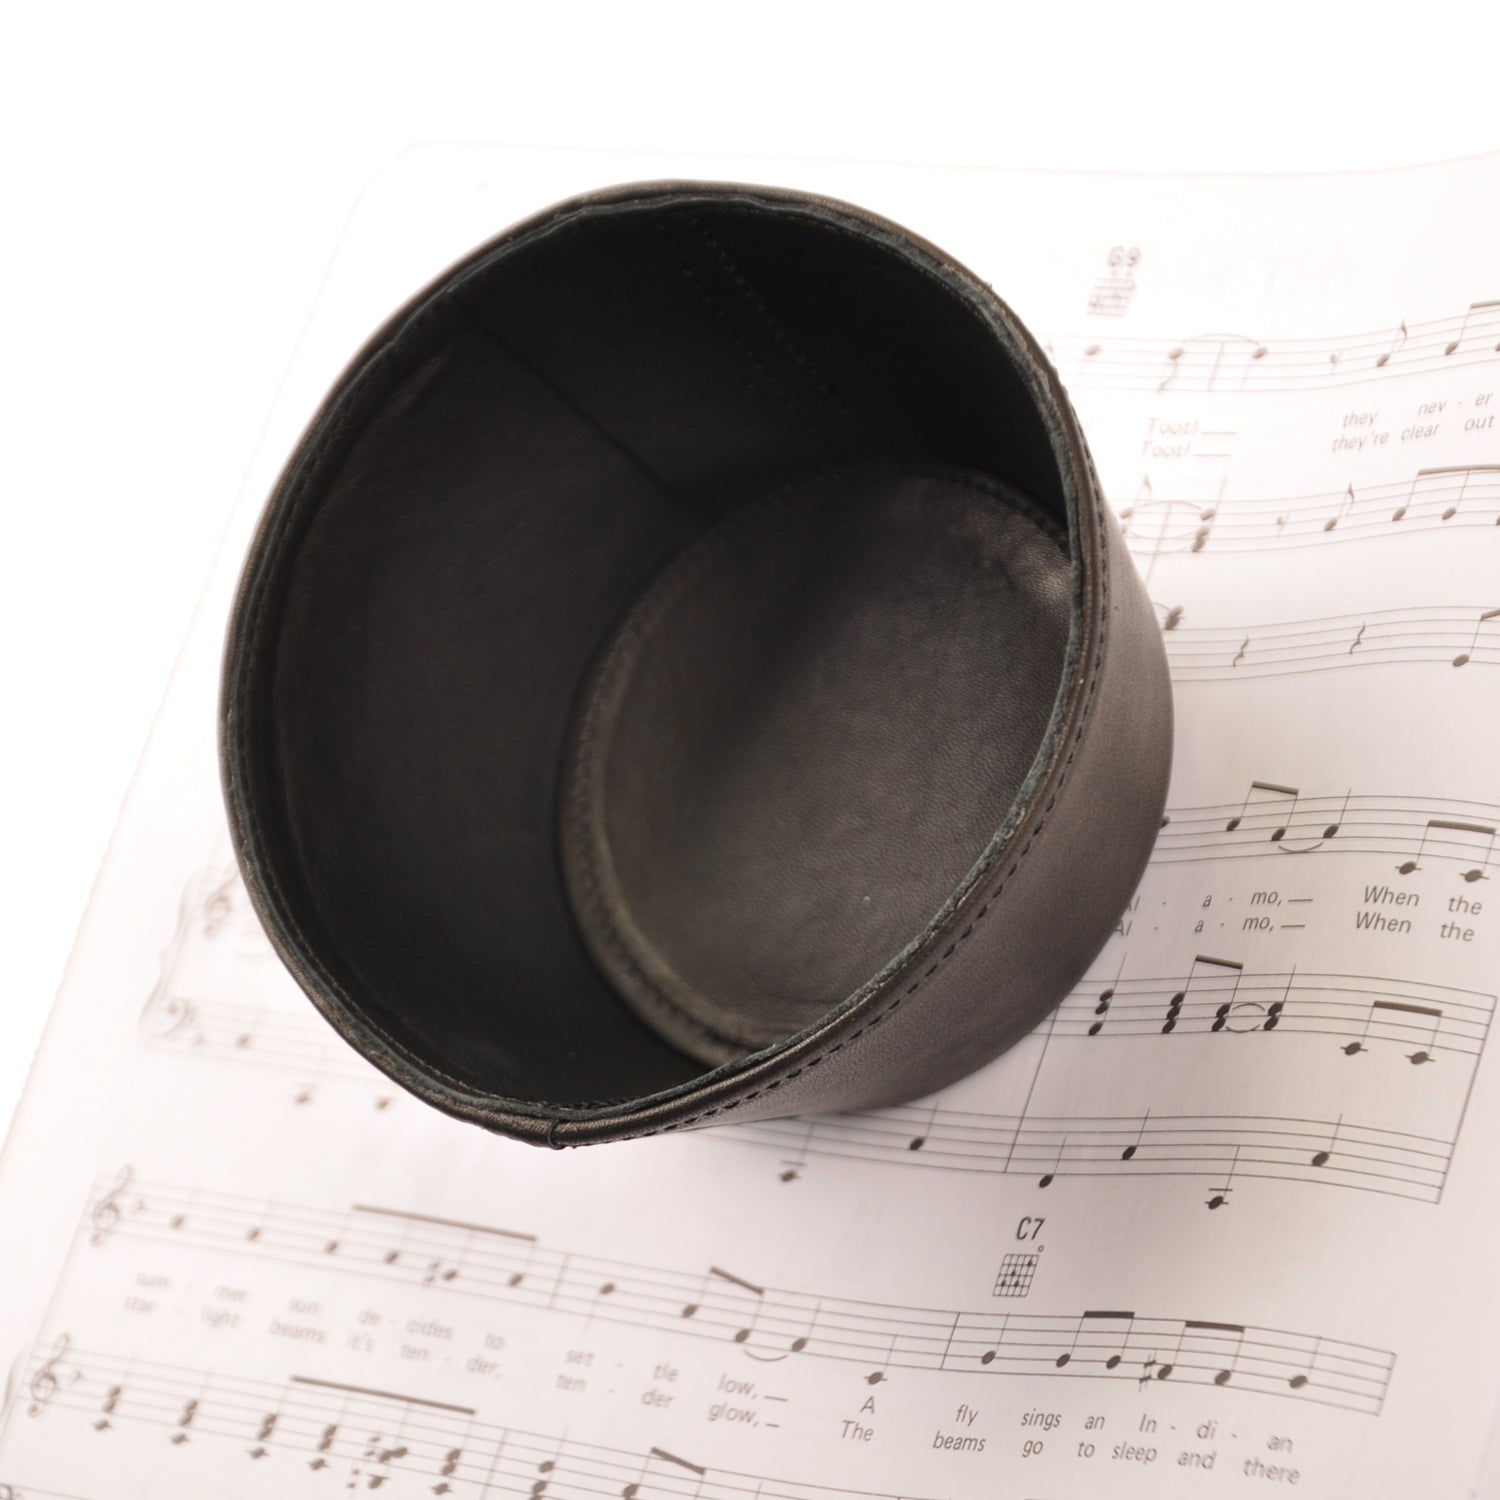 Trumpet Leather Plunger Mute